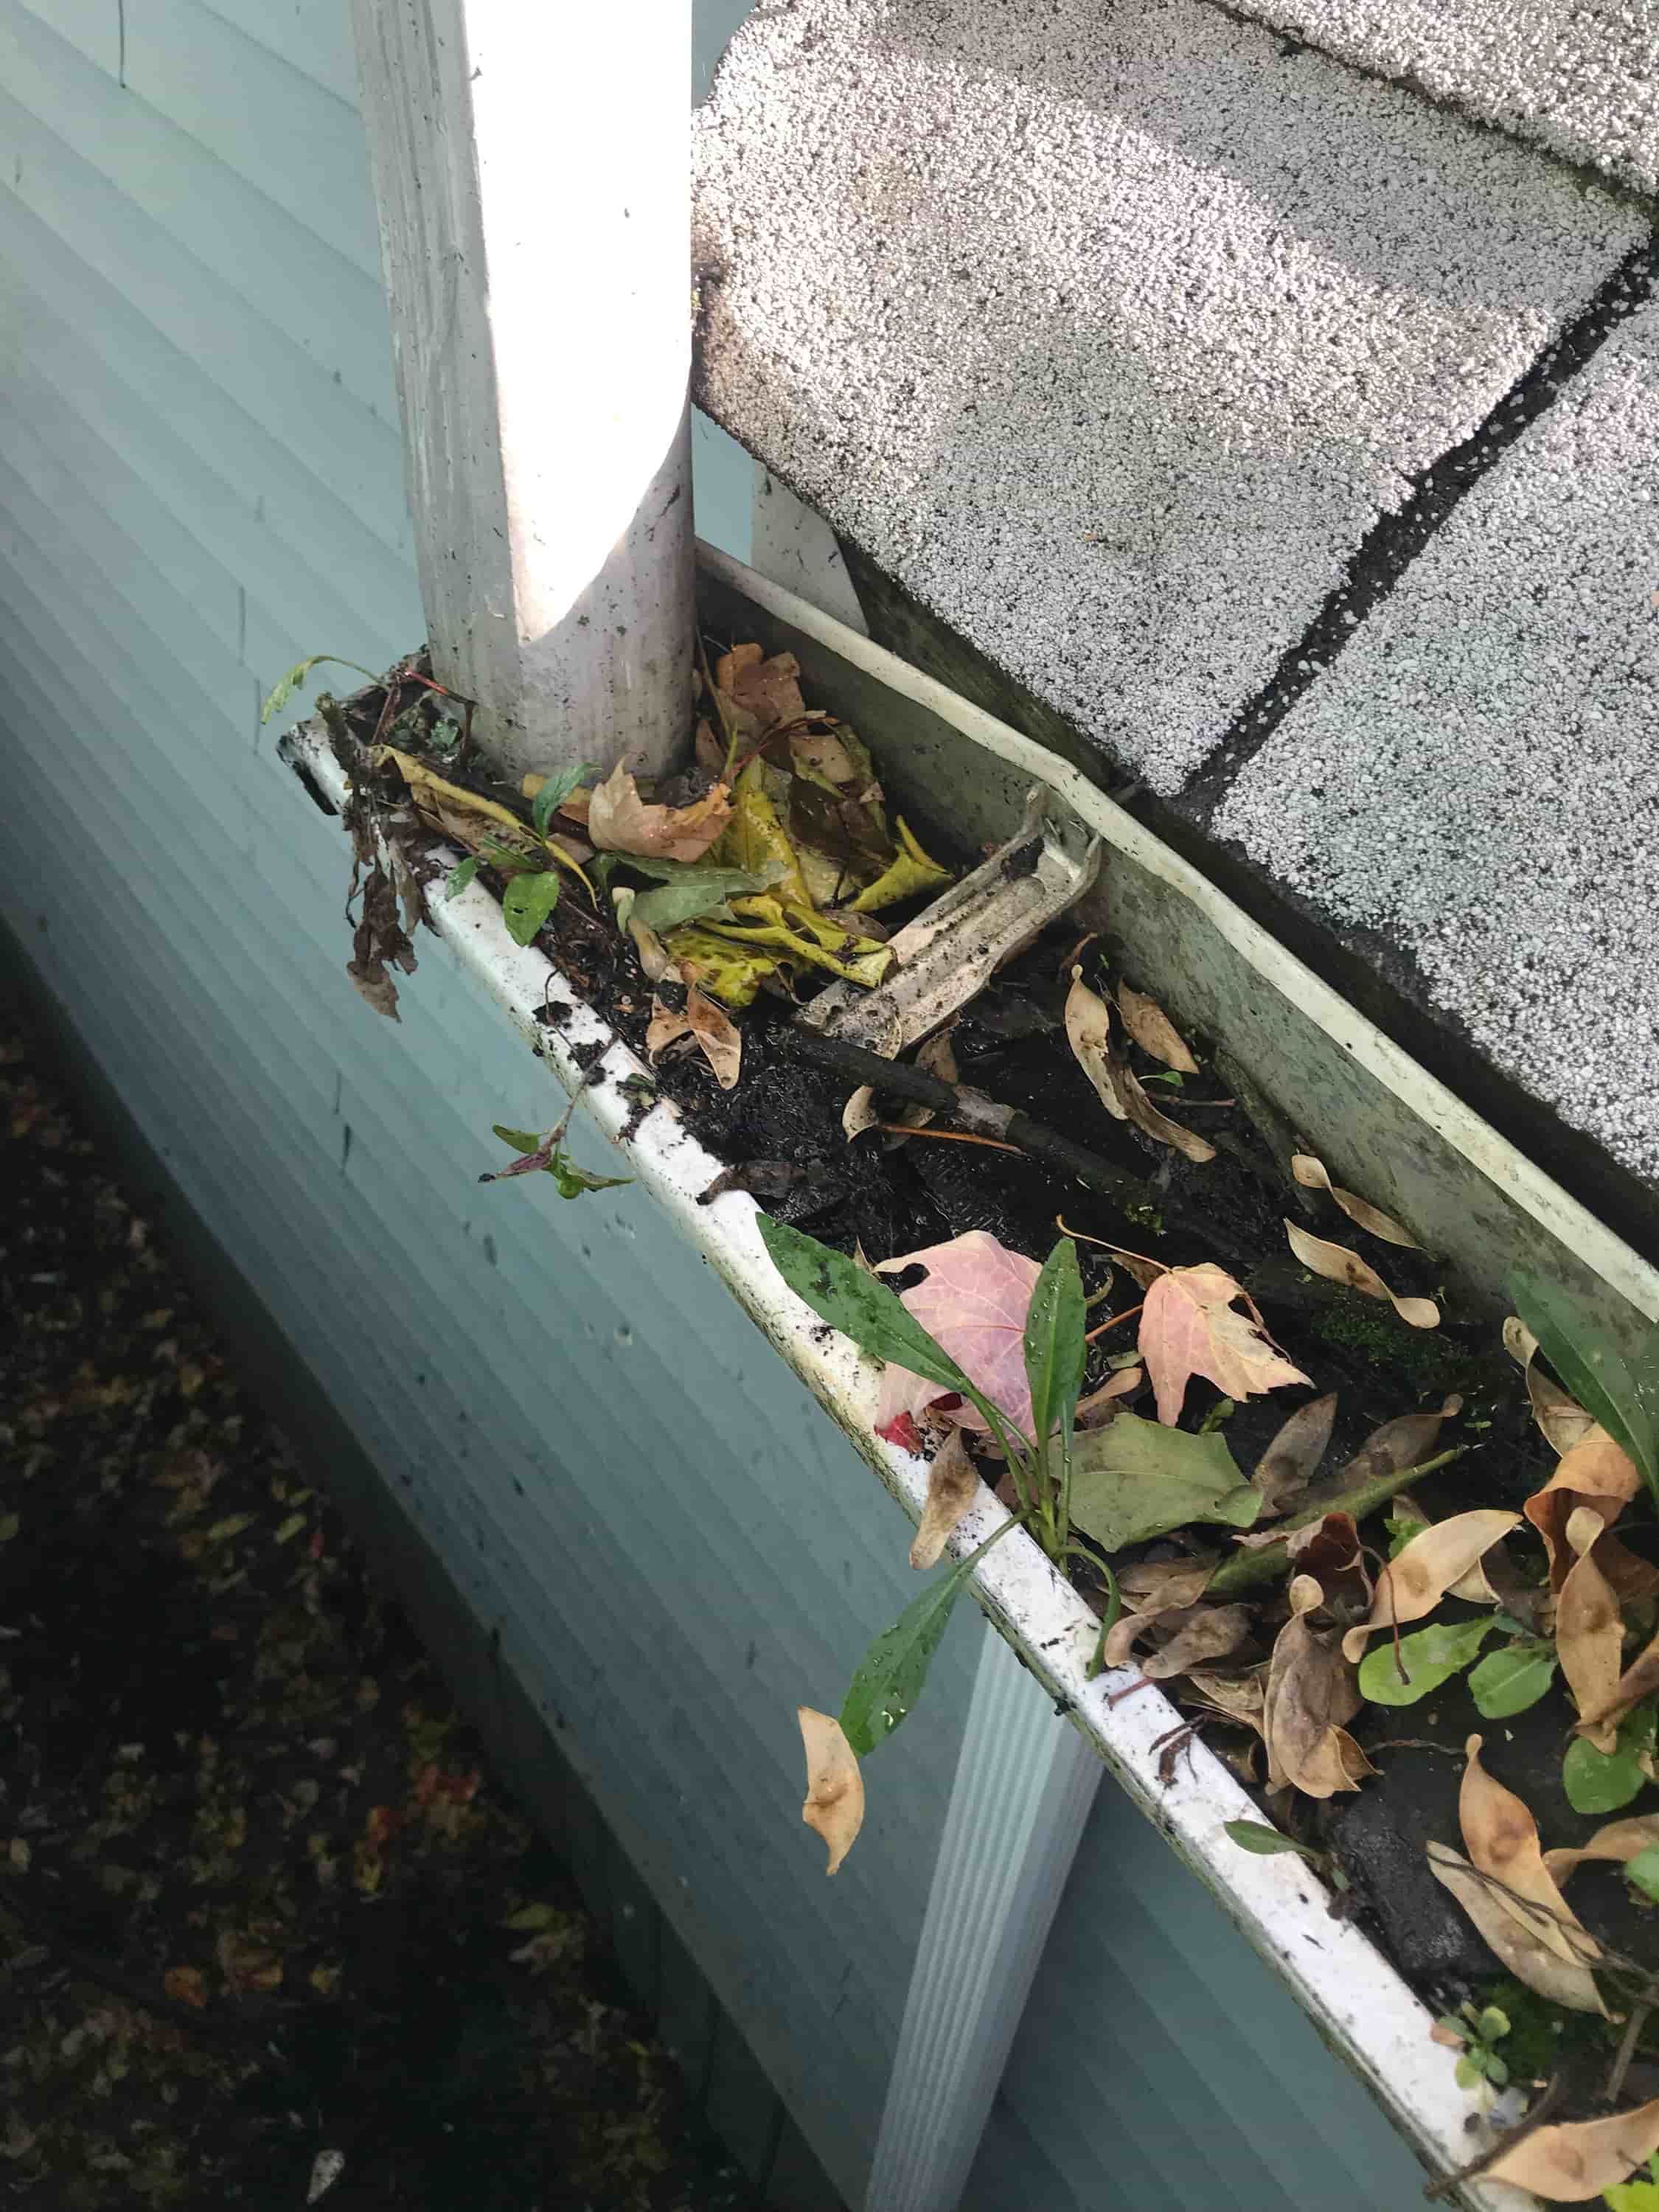 when should i clean my gutters